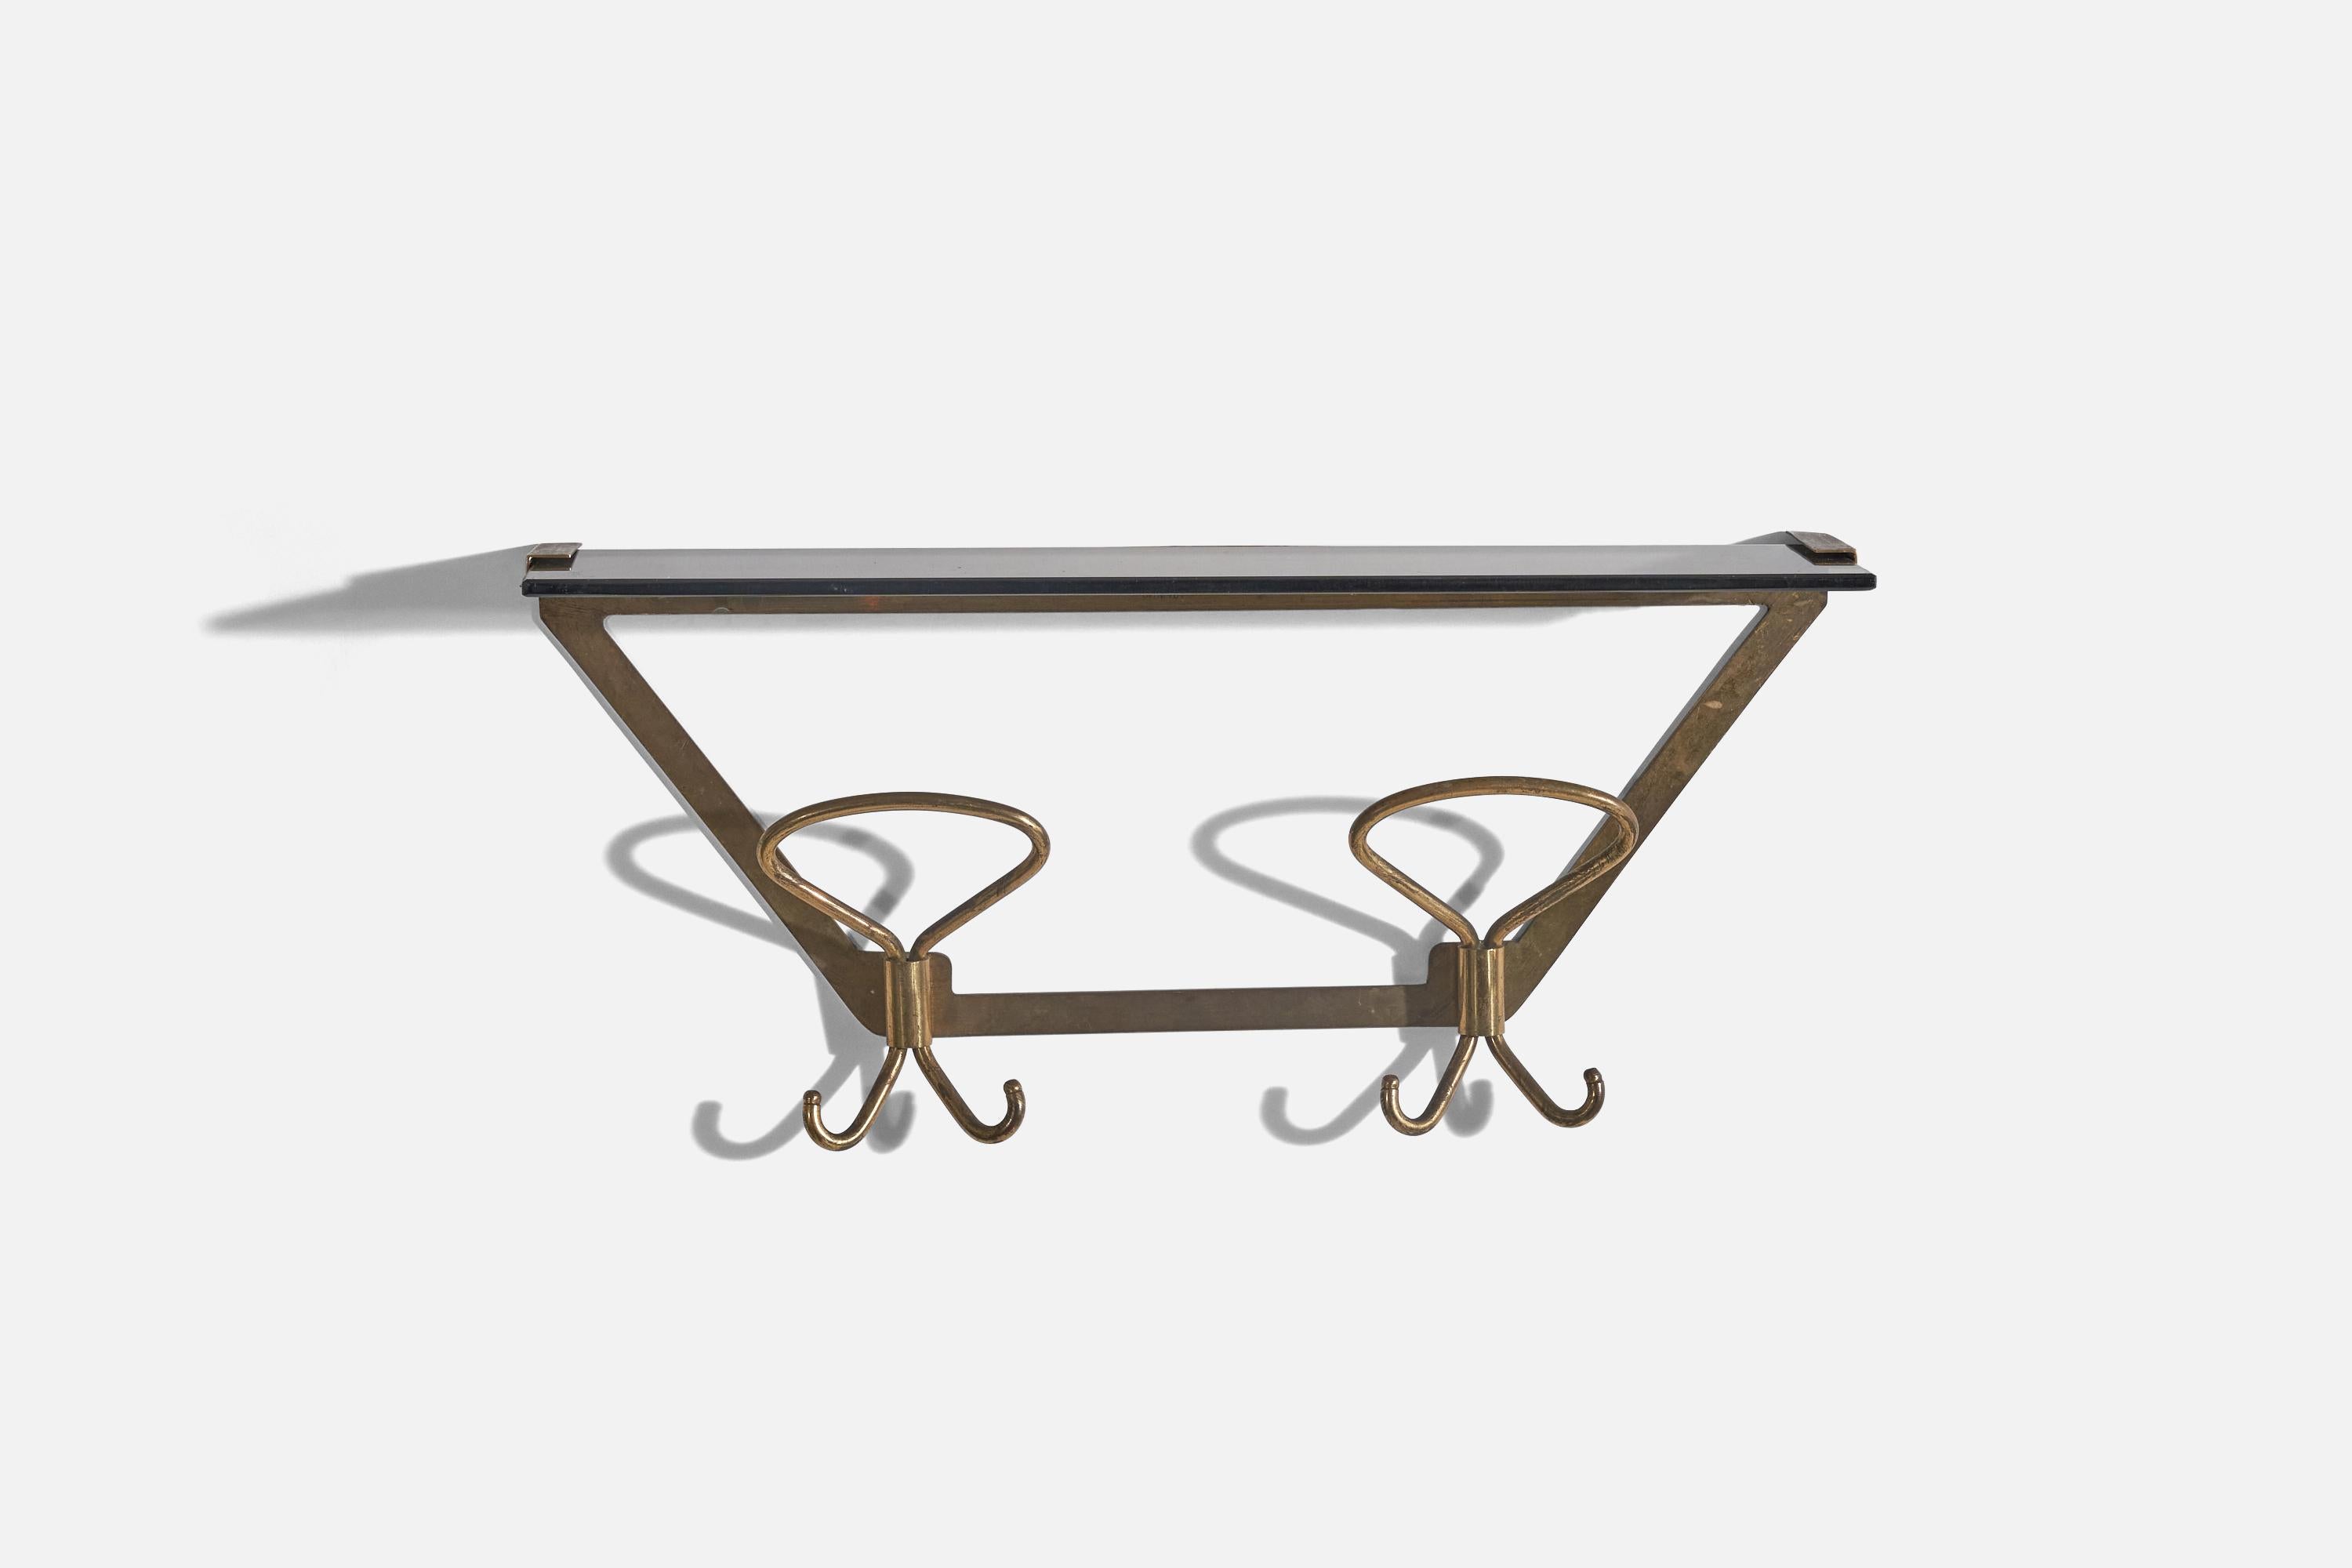 A brass and glass coat rack with top shelf, designed and produced by an Italian designer, Italy, 1940s.